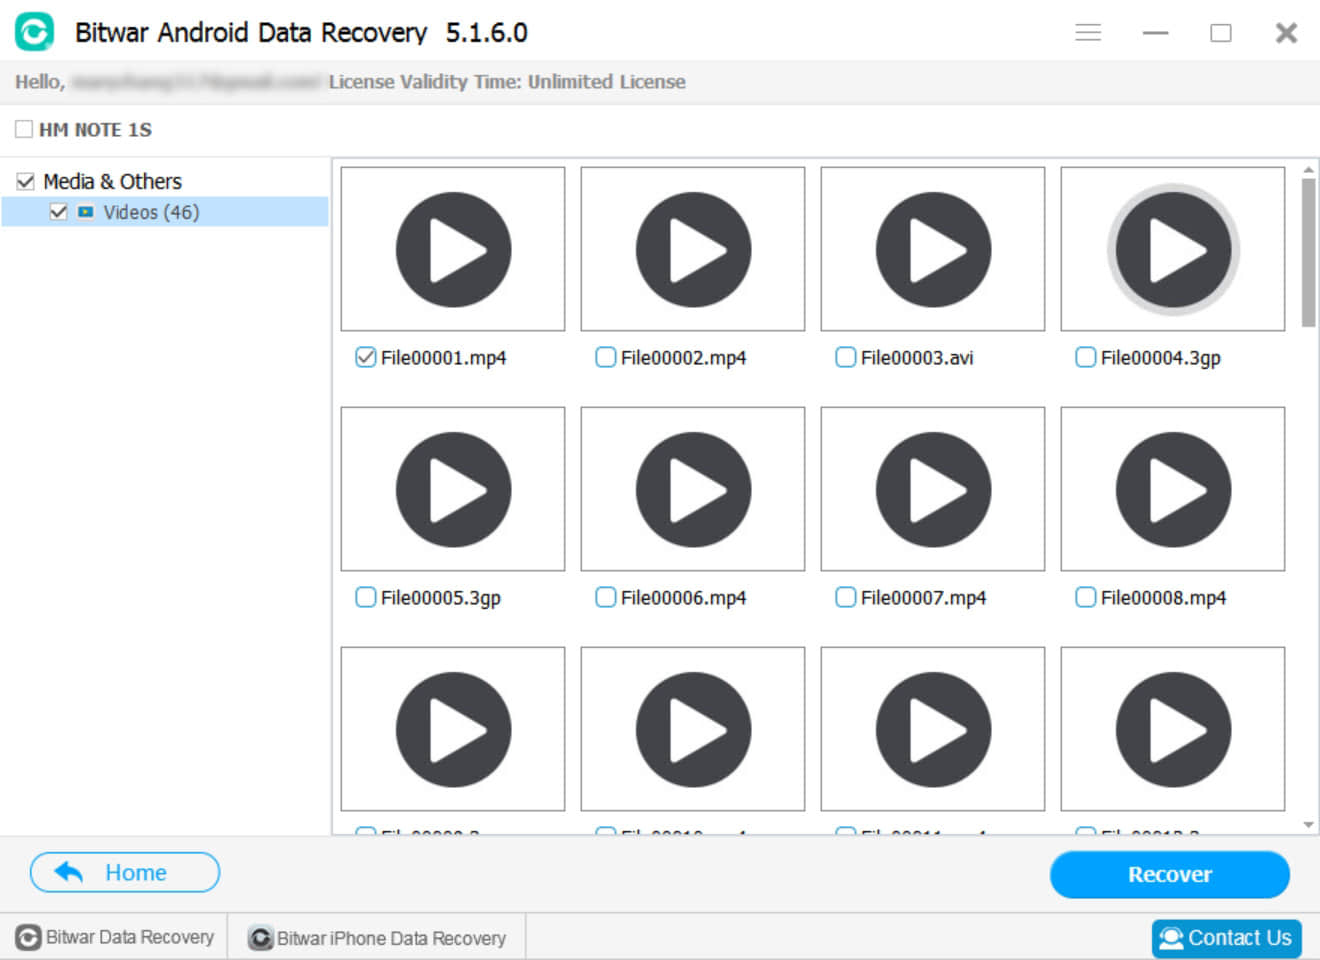 2.Bitwar Android Data Recovery - Videos Recovery